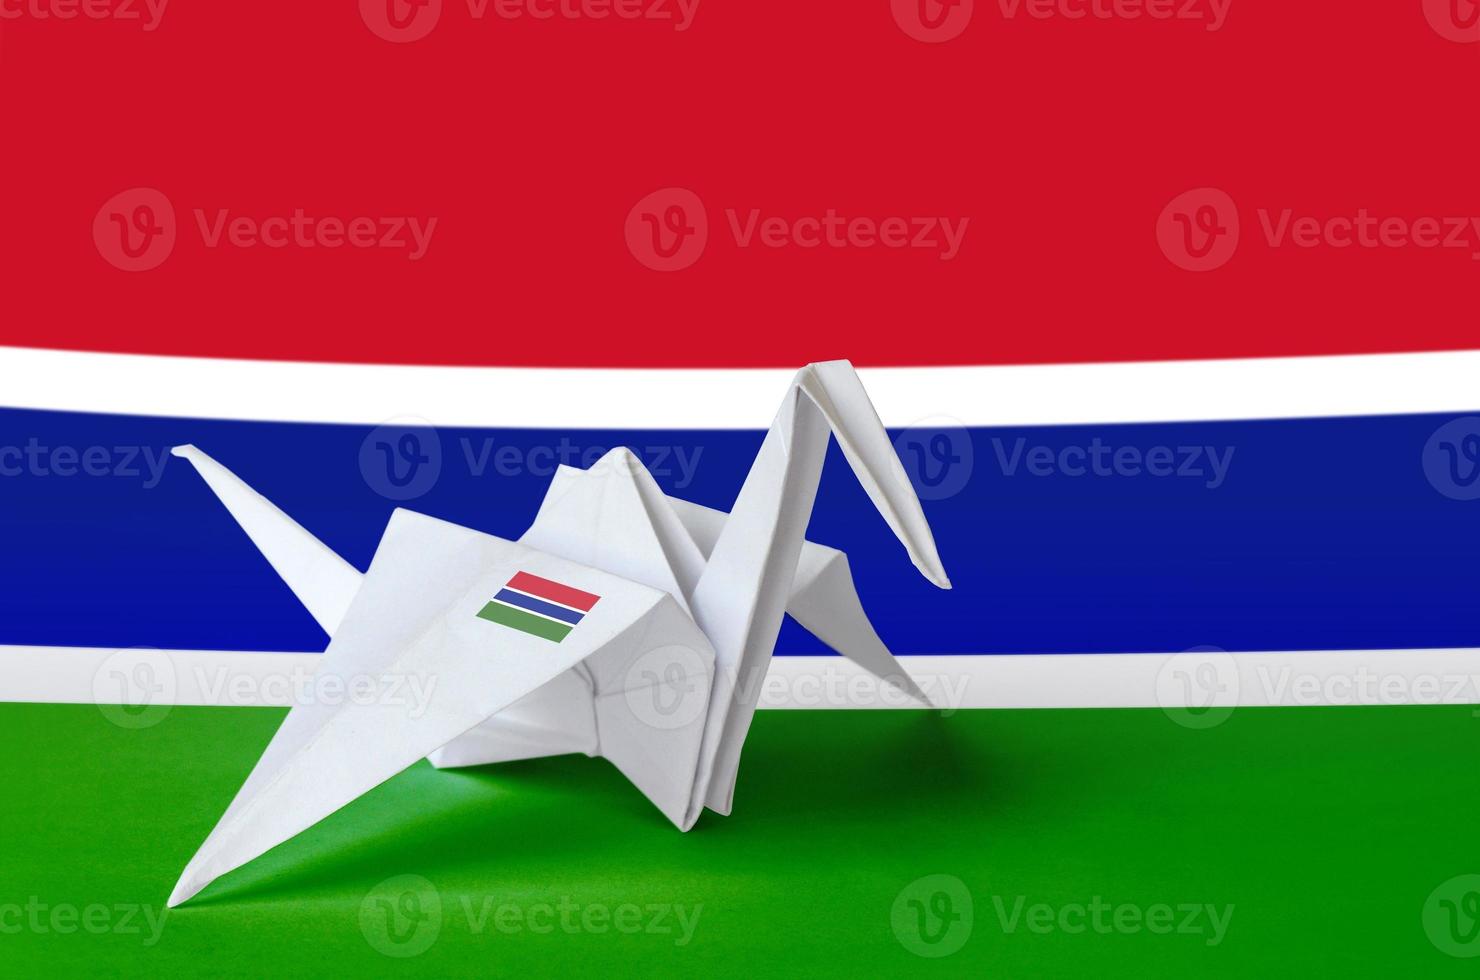 Gambia flag depicted on paper origami crane wing. Handmade arts concept photo